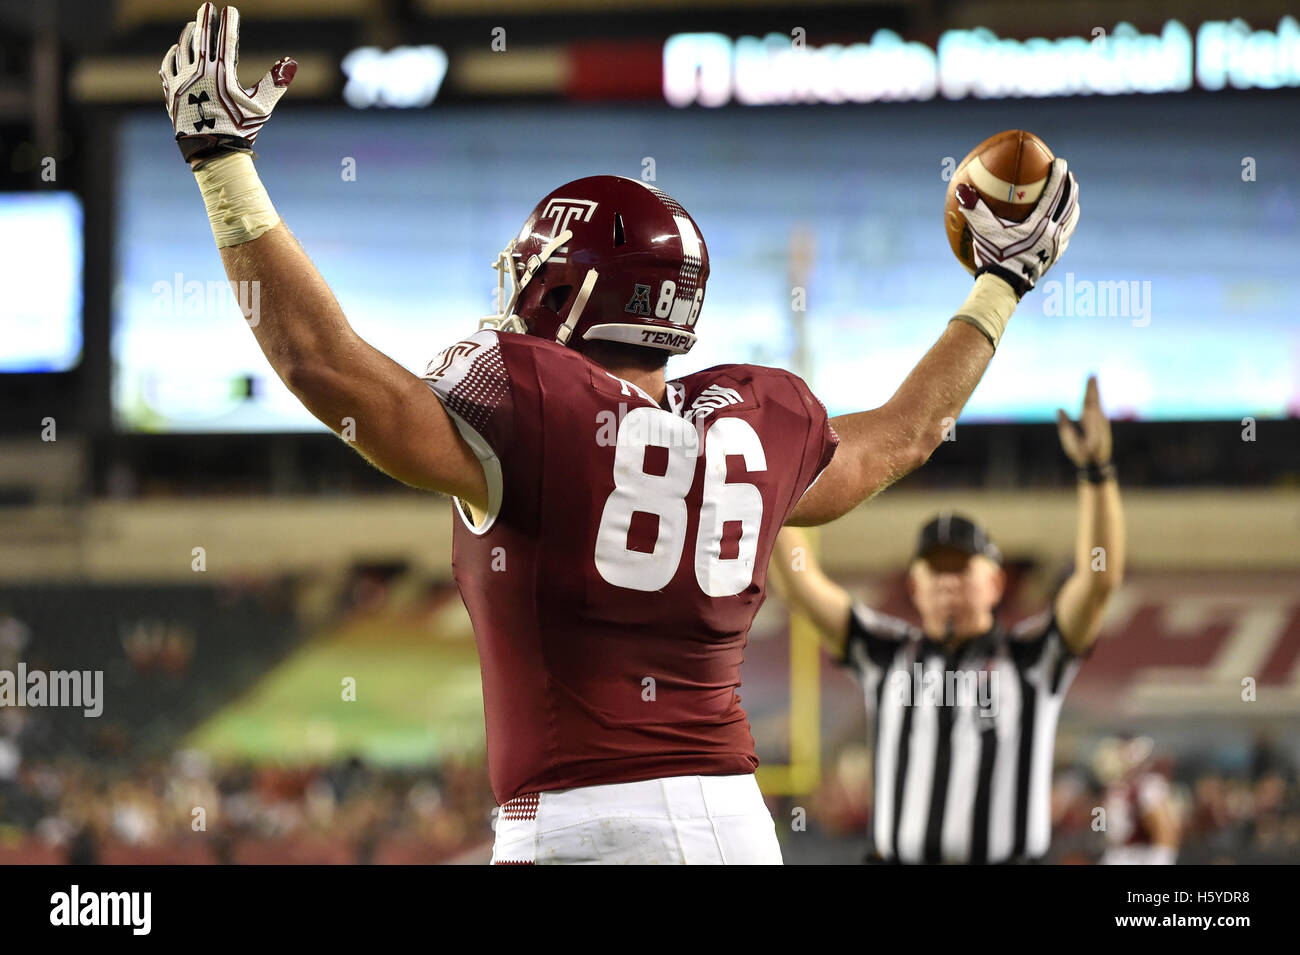 Philadelphia, Pennsylvania, USA. 21st Oct, 2016. Temple Owls tight end COLIN THOMPSON (86) celebrates a first half touchdown reception during a game played at Lincoln Financial Field in Philadelphia. Credit:  Ken Inness/ZUMA Wire/Alamy Live News Stock Photo